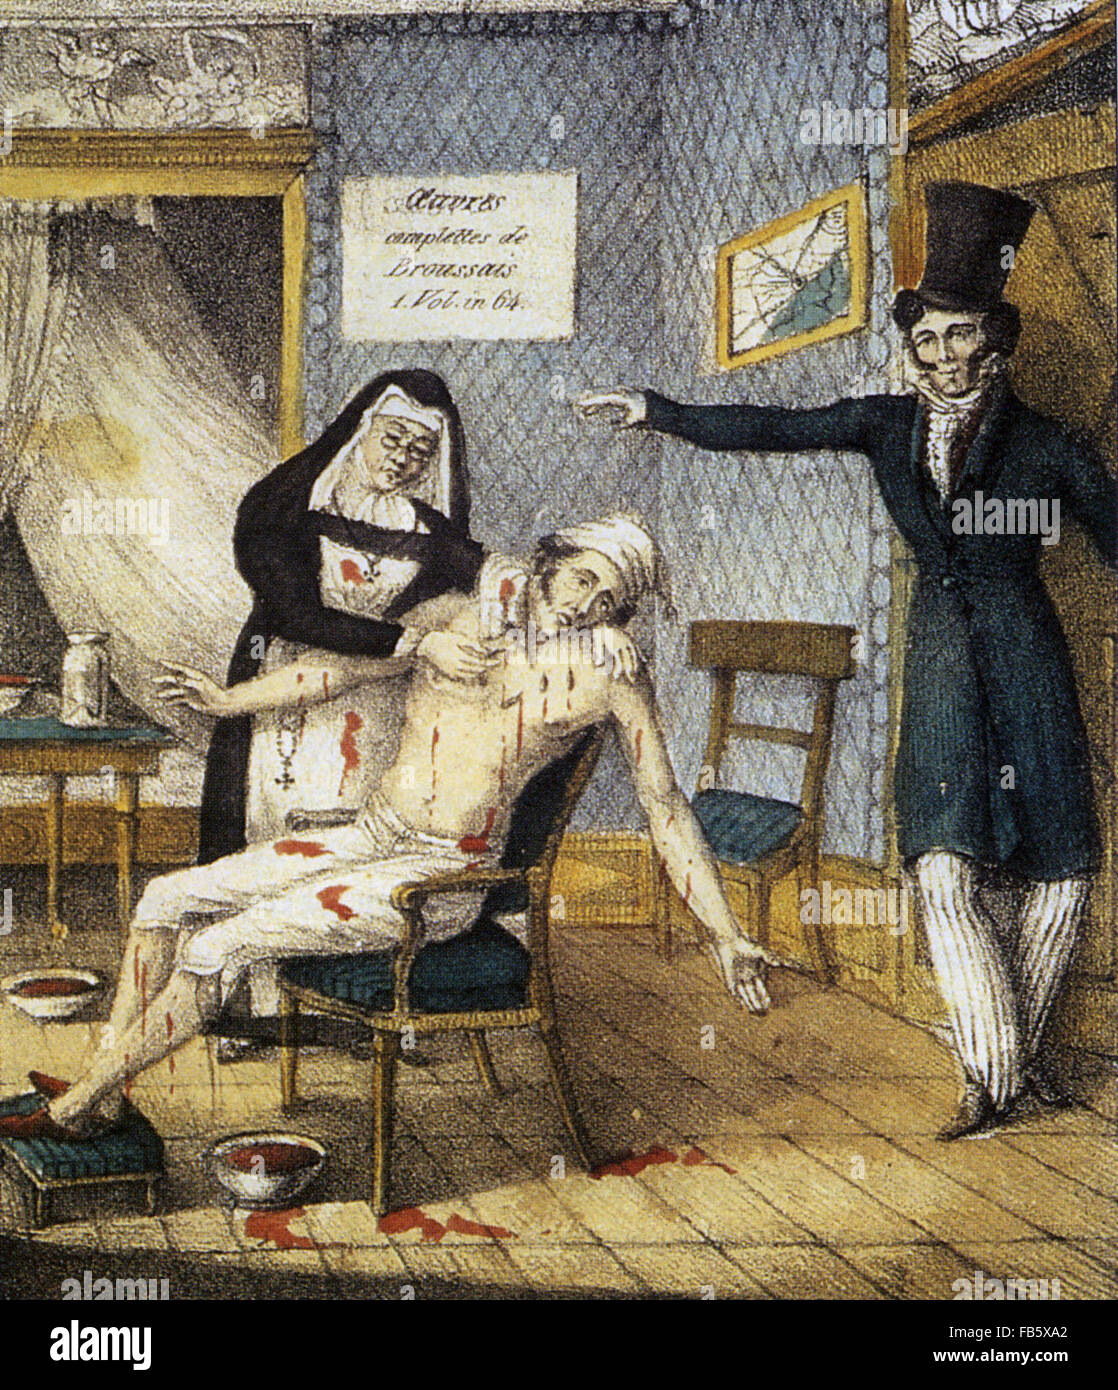 FRANCOIS BROUSSAIS (1772-1838) French physician. Lithograph about 1810 shows Broussais instructing a nurse to continue with the blood letting procedure of which he was a great advocate. Stock Photo